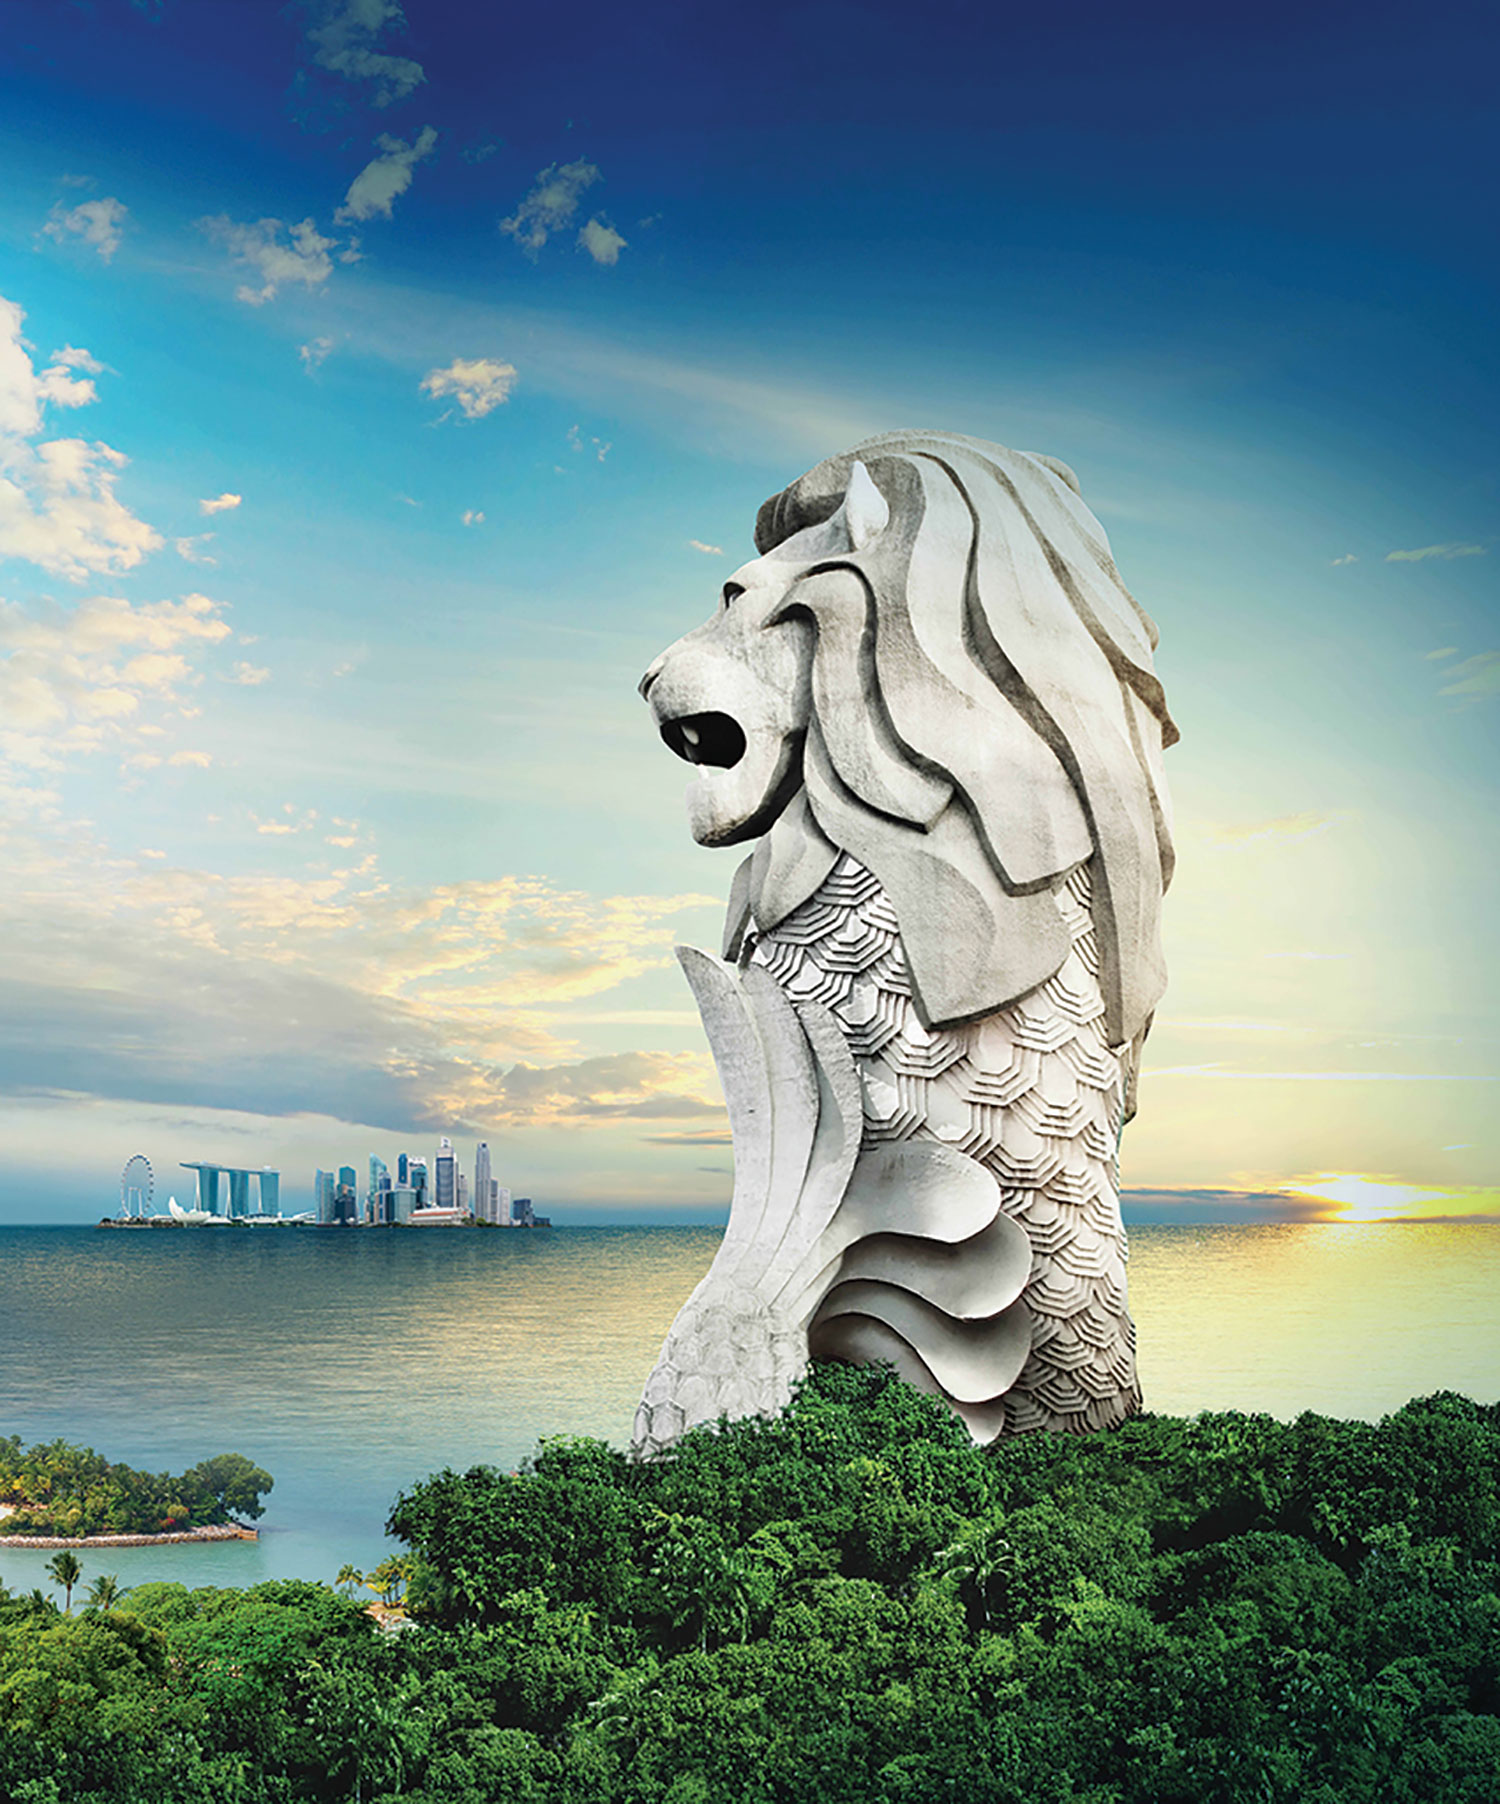 Escape with ONE FABER GROUP with Leisure Activities across Faber Peak & Sentosa